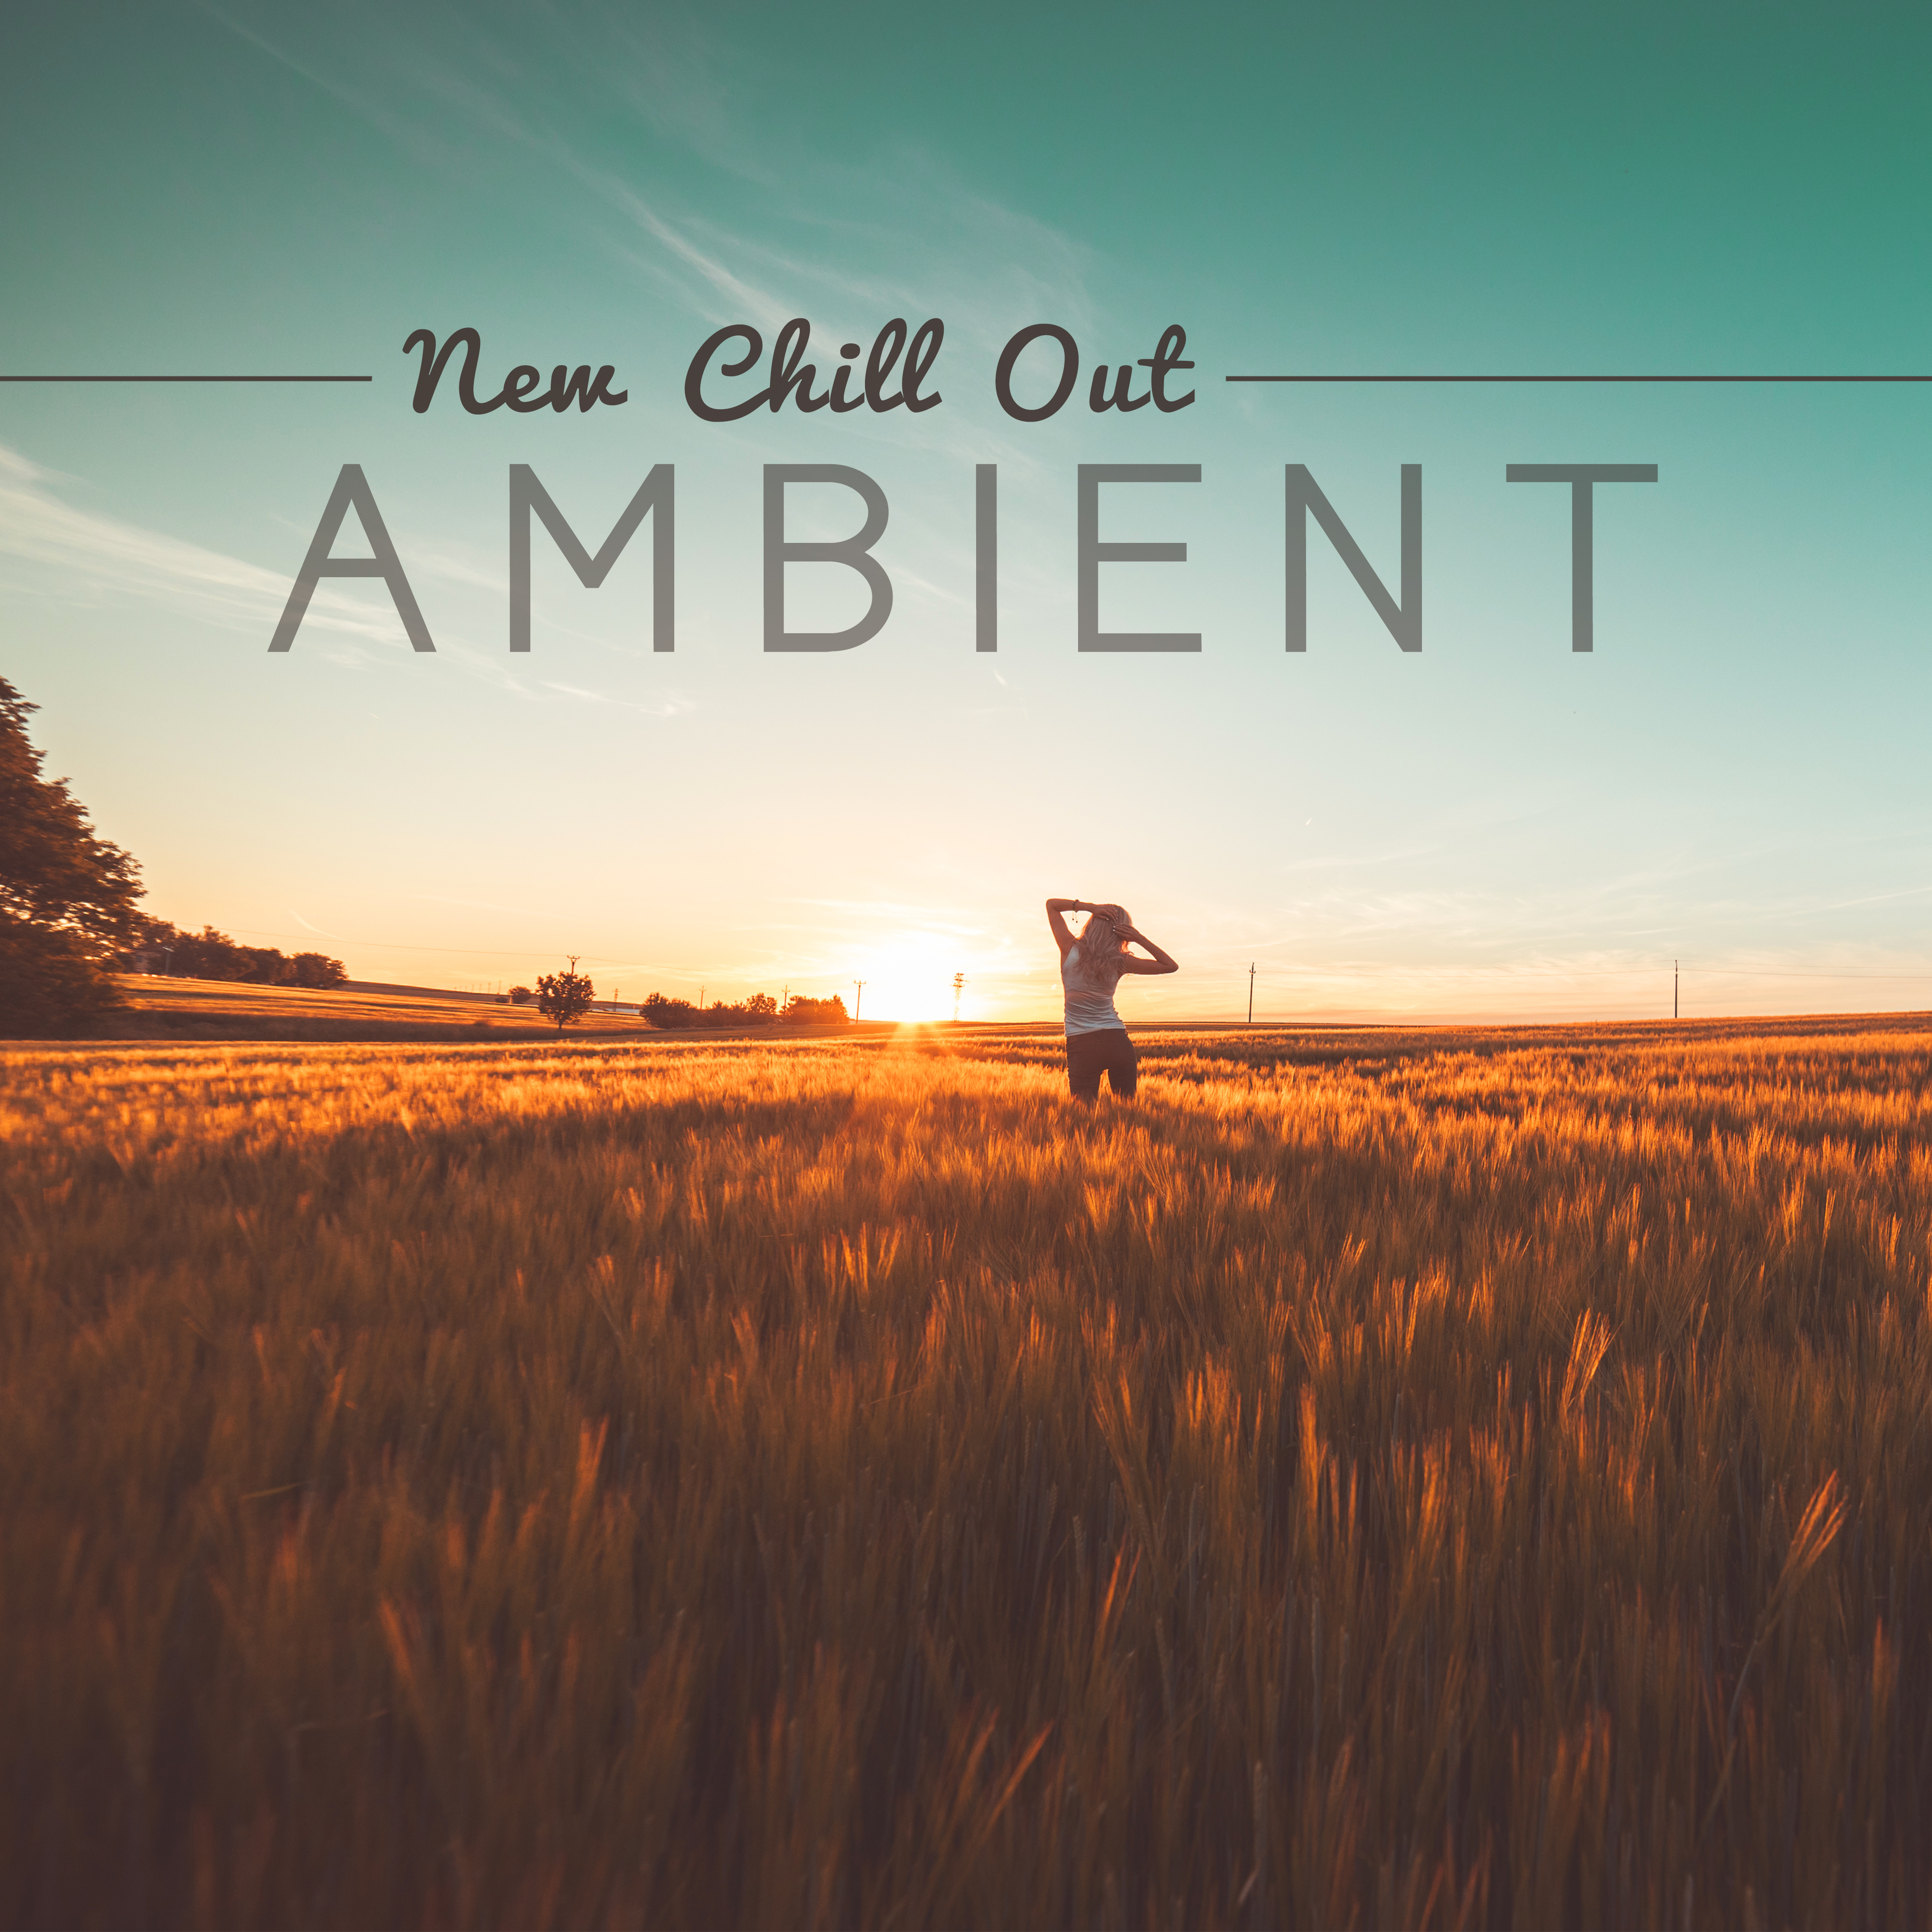 New Chill Out Ambient  Electronic Chillout Music, Downbeat, Relax  Chill, Ibiza, Ambient Lounge